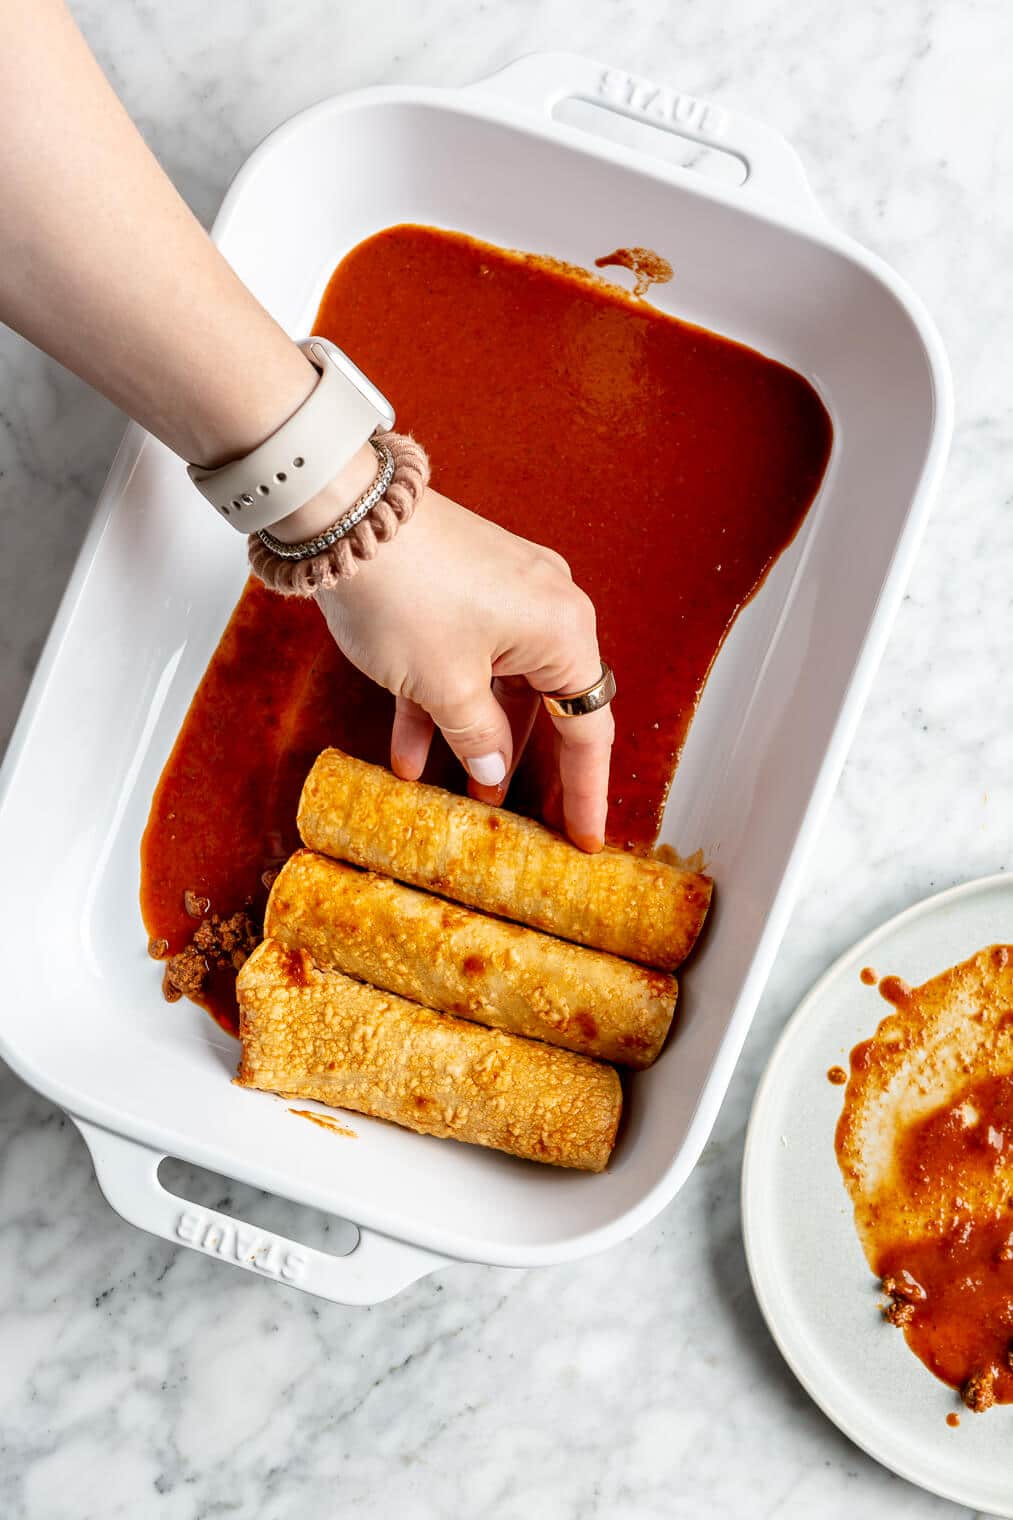 A person placing a rolled enchilada into a casserole dish next to two other enchiladas.